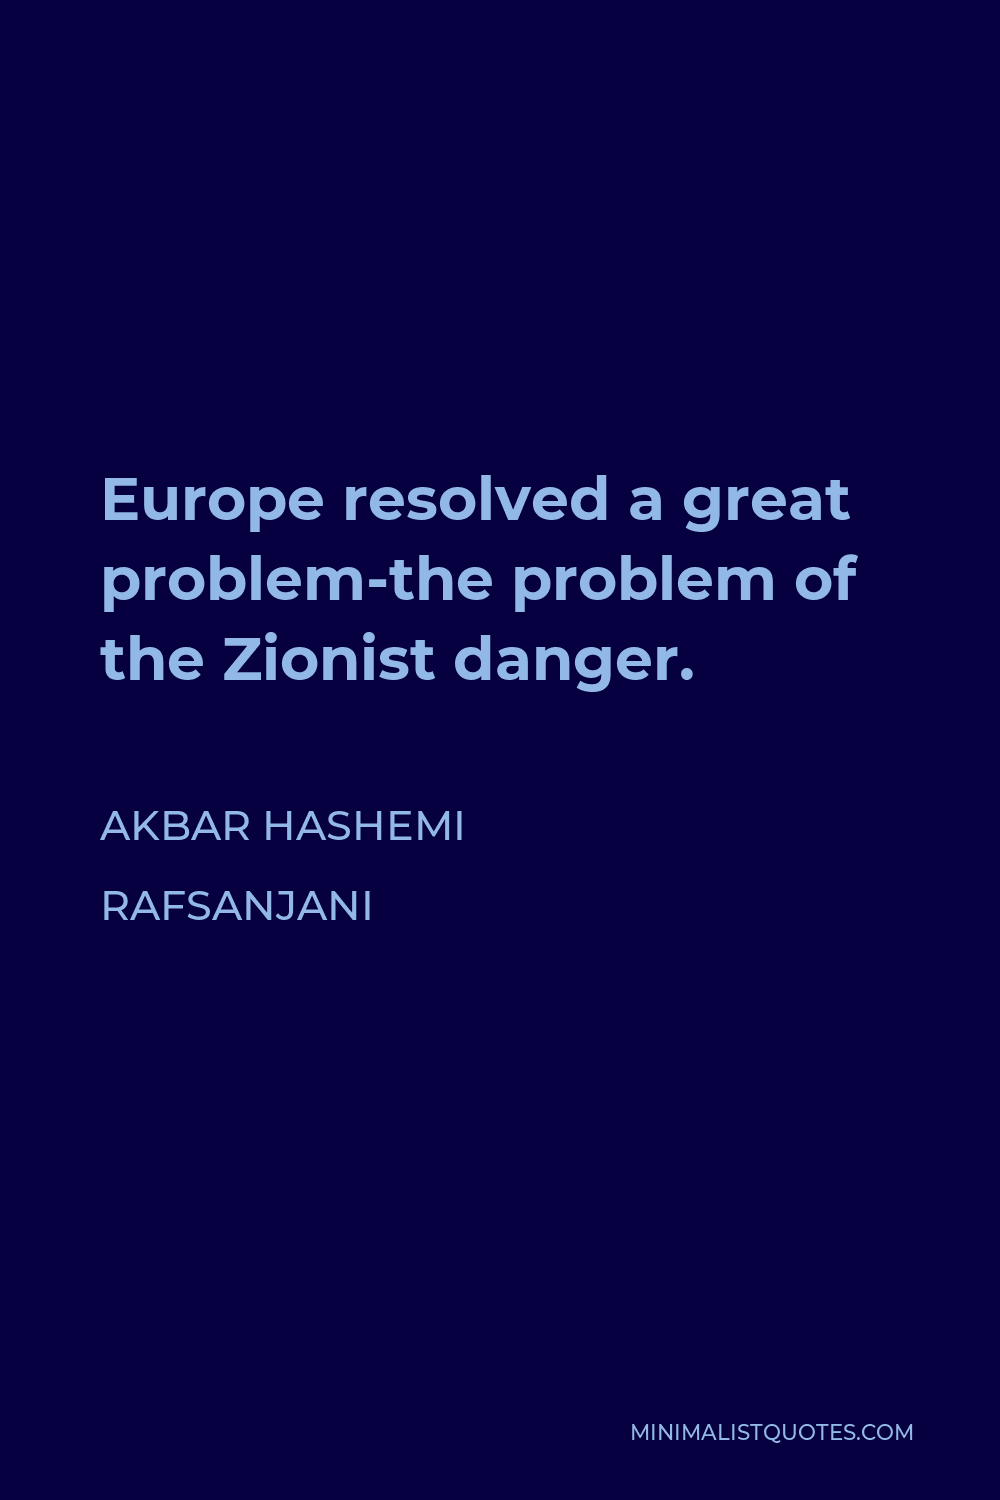 Akbar Hashemi Rafsanjani Quote - Europe resolved a great problem-the problem of the Zionist danger.